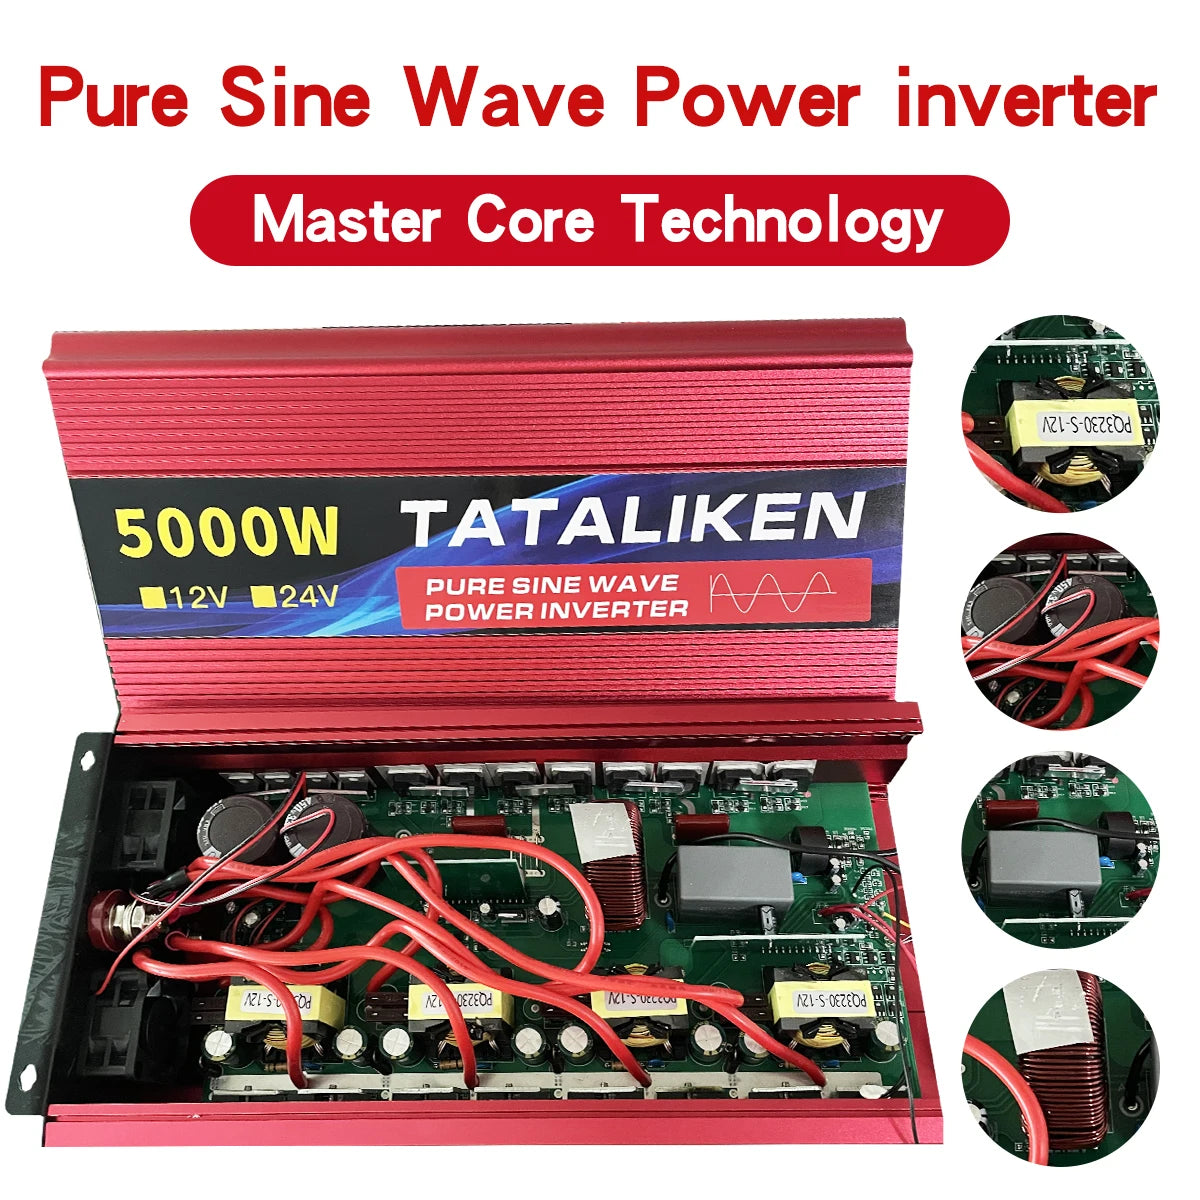 Pure sine wave inverter converts DC power to AC 220V, 50/60Hz, with LED display and universal socket.